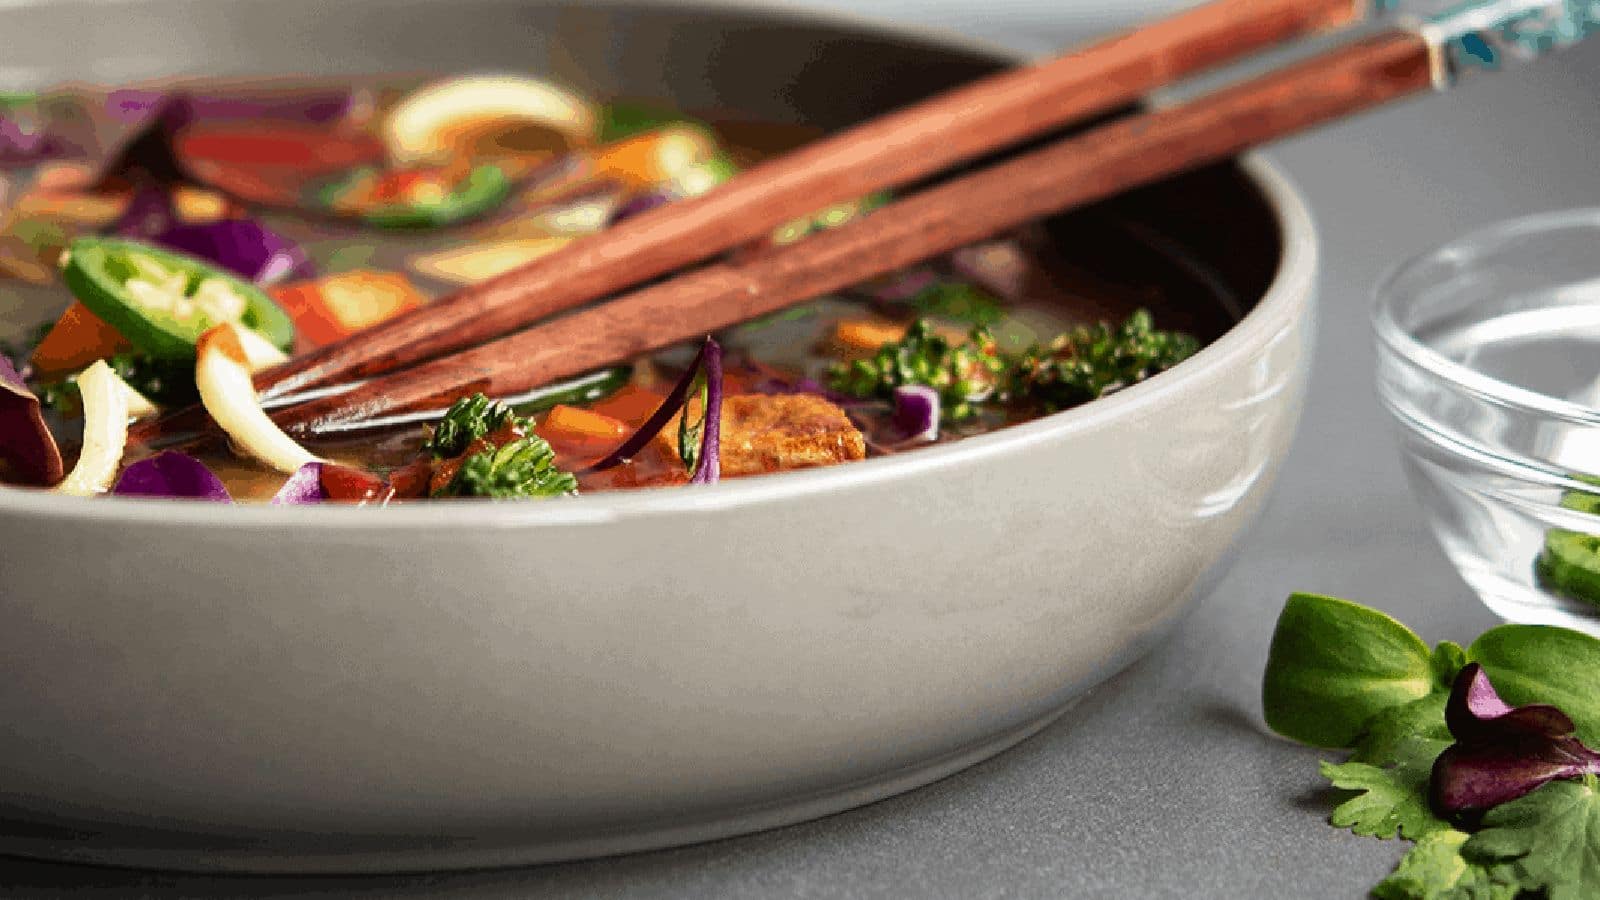 Guests coming over? Serve this Vietnamese vegan pho